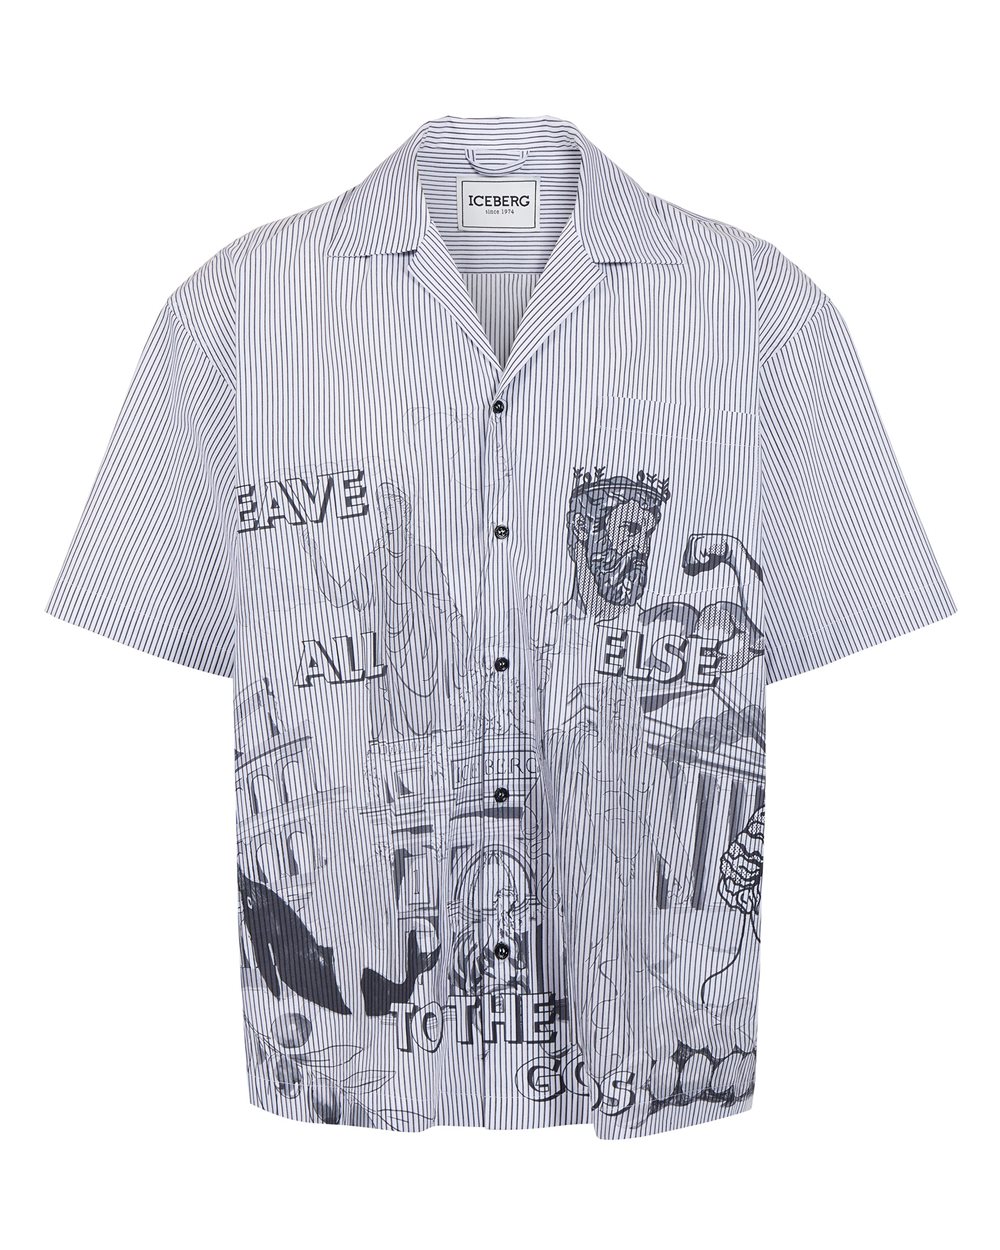 Shirt with Rome prints - shirts | Iceberg - Official Website